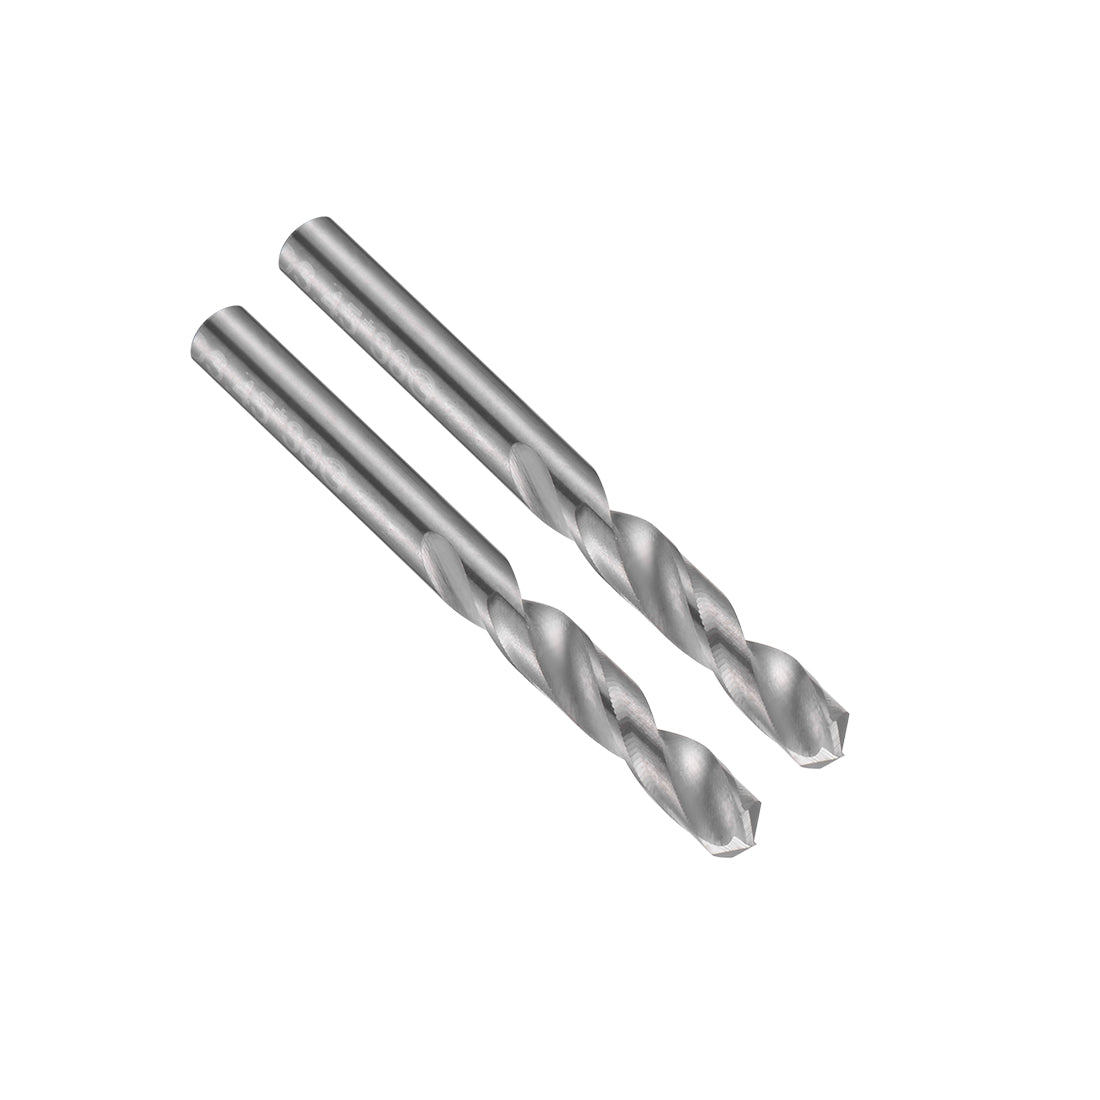 uxcell Uxcell 3.45mm Solid Carbide Drill Bits Straight Shank for Stainless Steel Alloy 2 Pcs